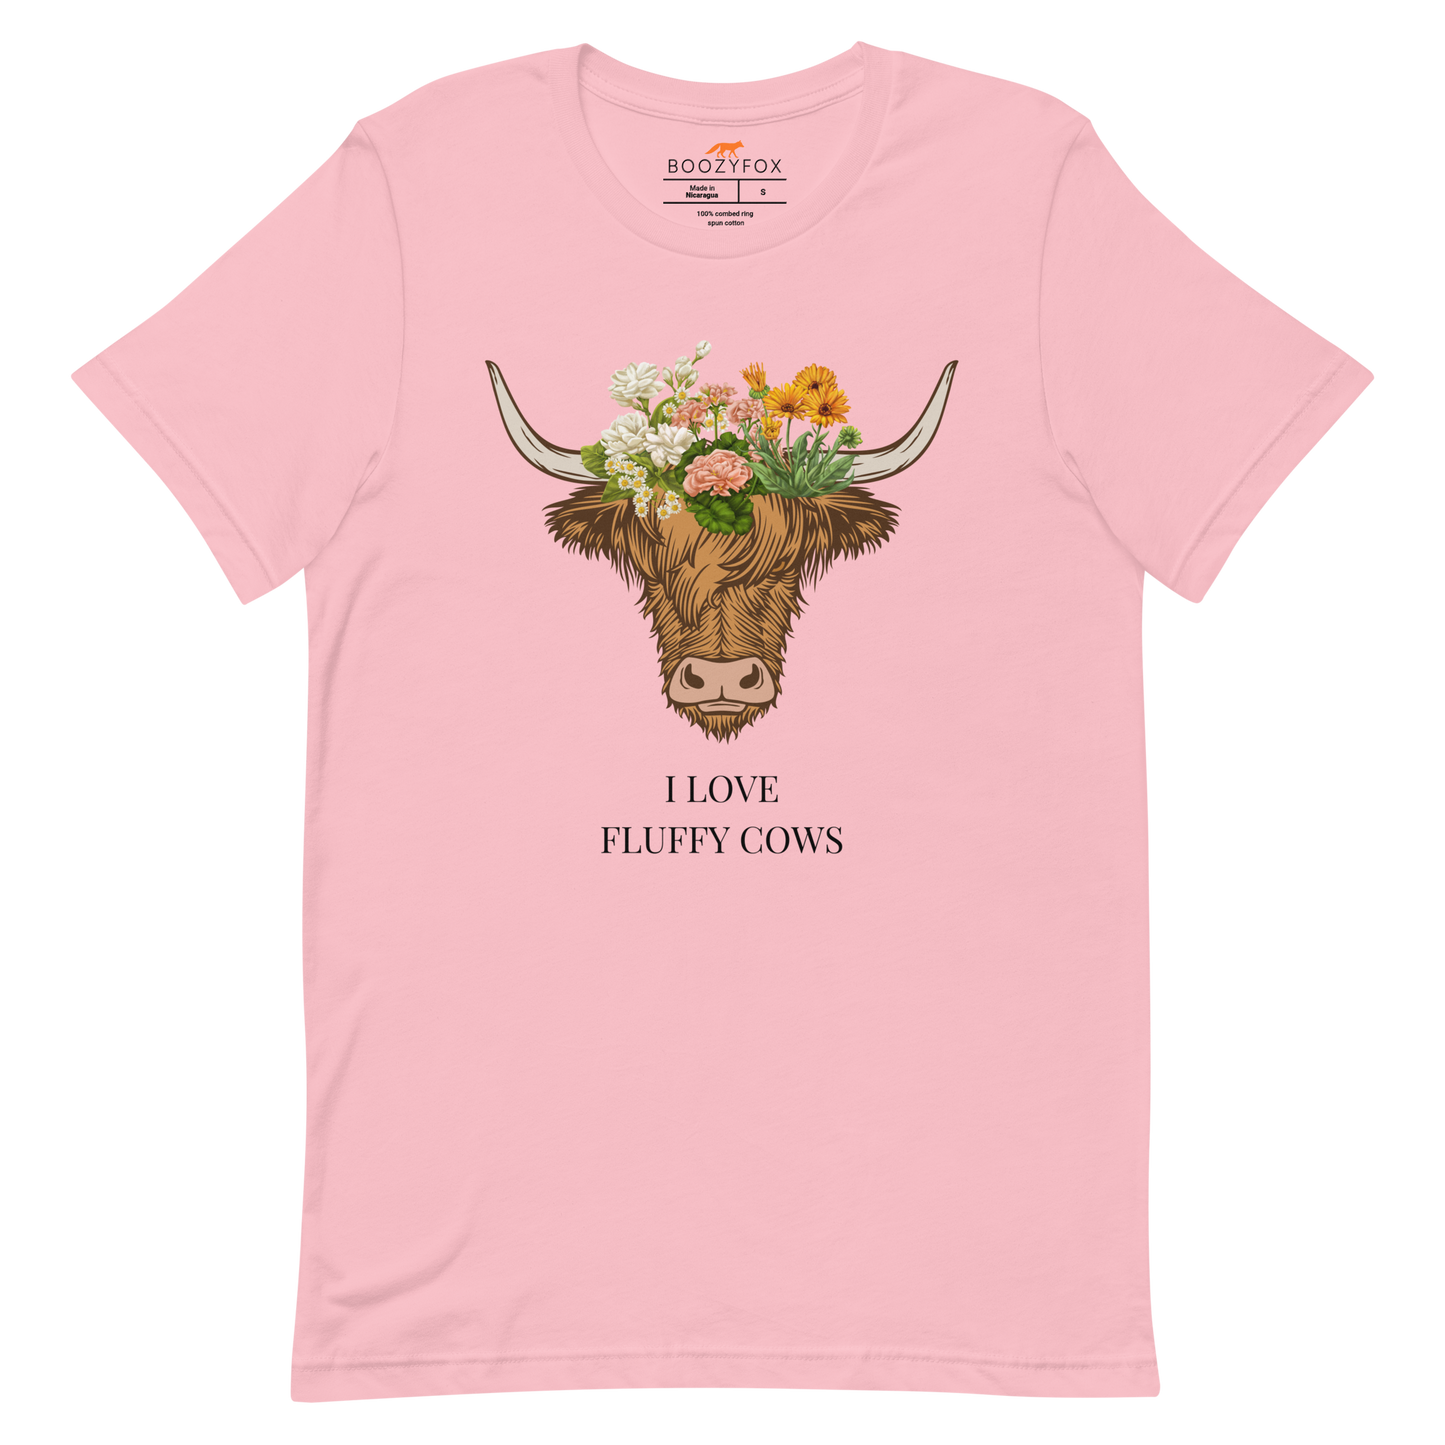 Pink Premium Highland Cow Tee featuring an adorable I Love Fluffy Cows graphic on the chest - Cute Graphic Highland Cow Tees - Boozy Fox